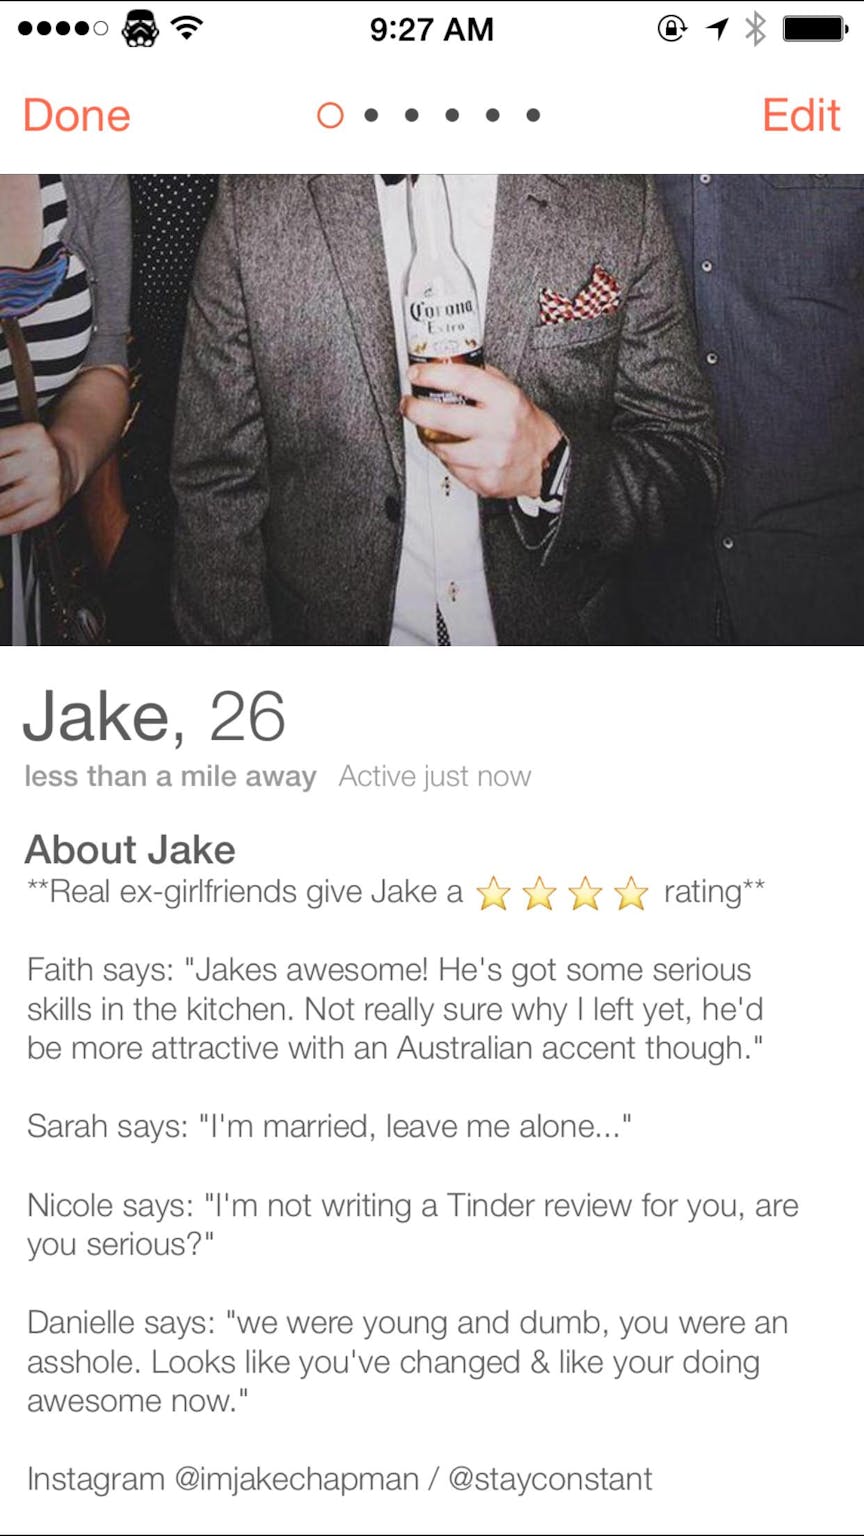 This guys ex-girlfriends wrote him Tinder reviews—with 